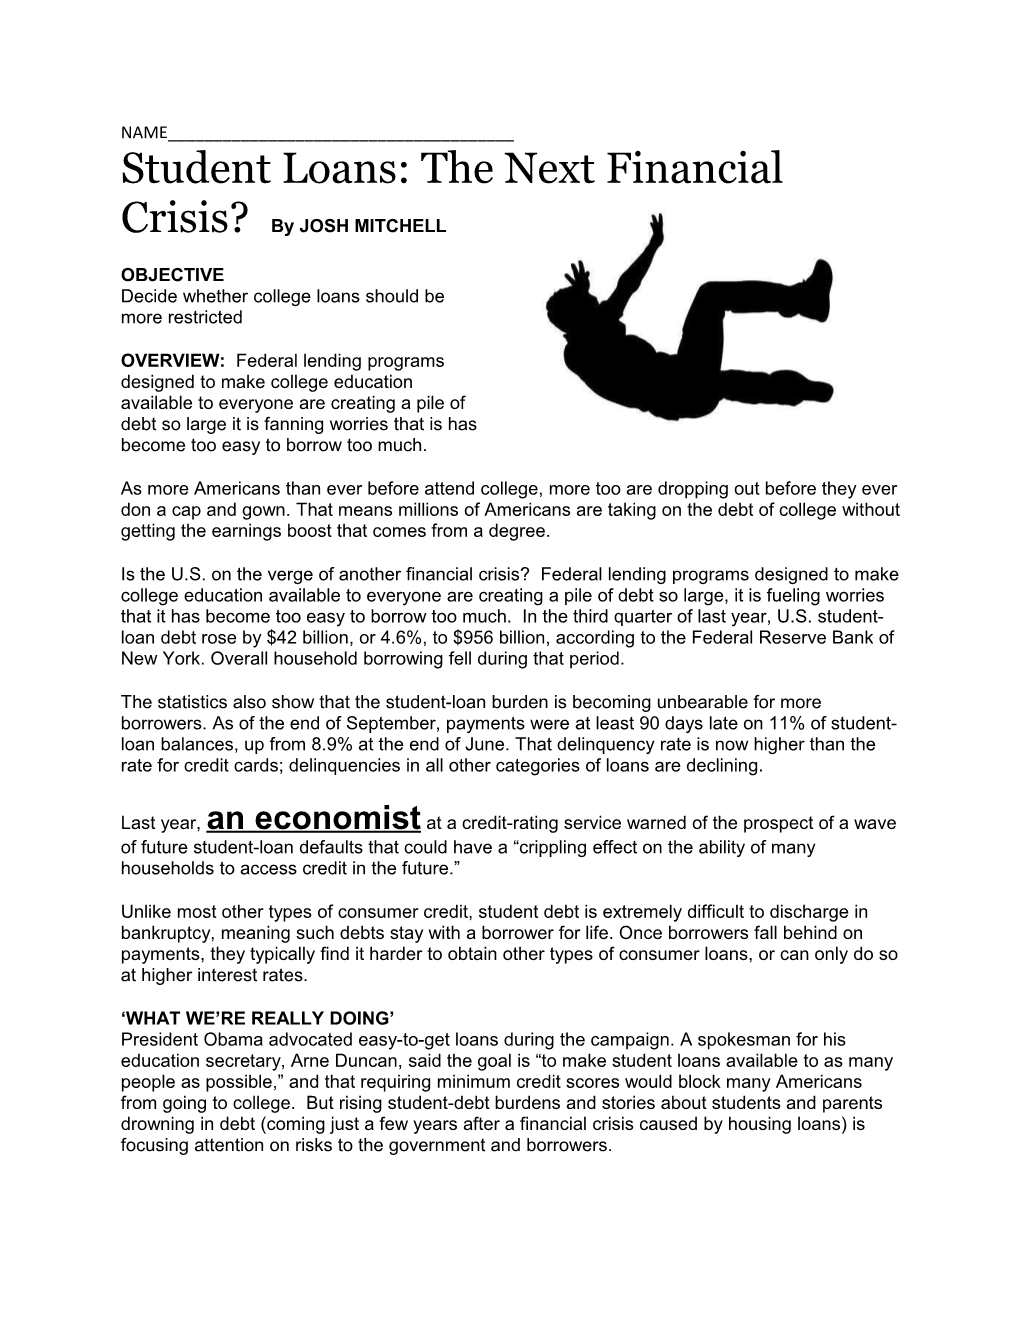 Student Loans: the Next Financial Crisis? by JOSH MITCHELL